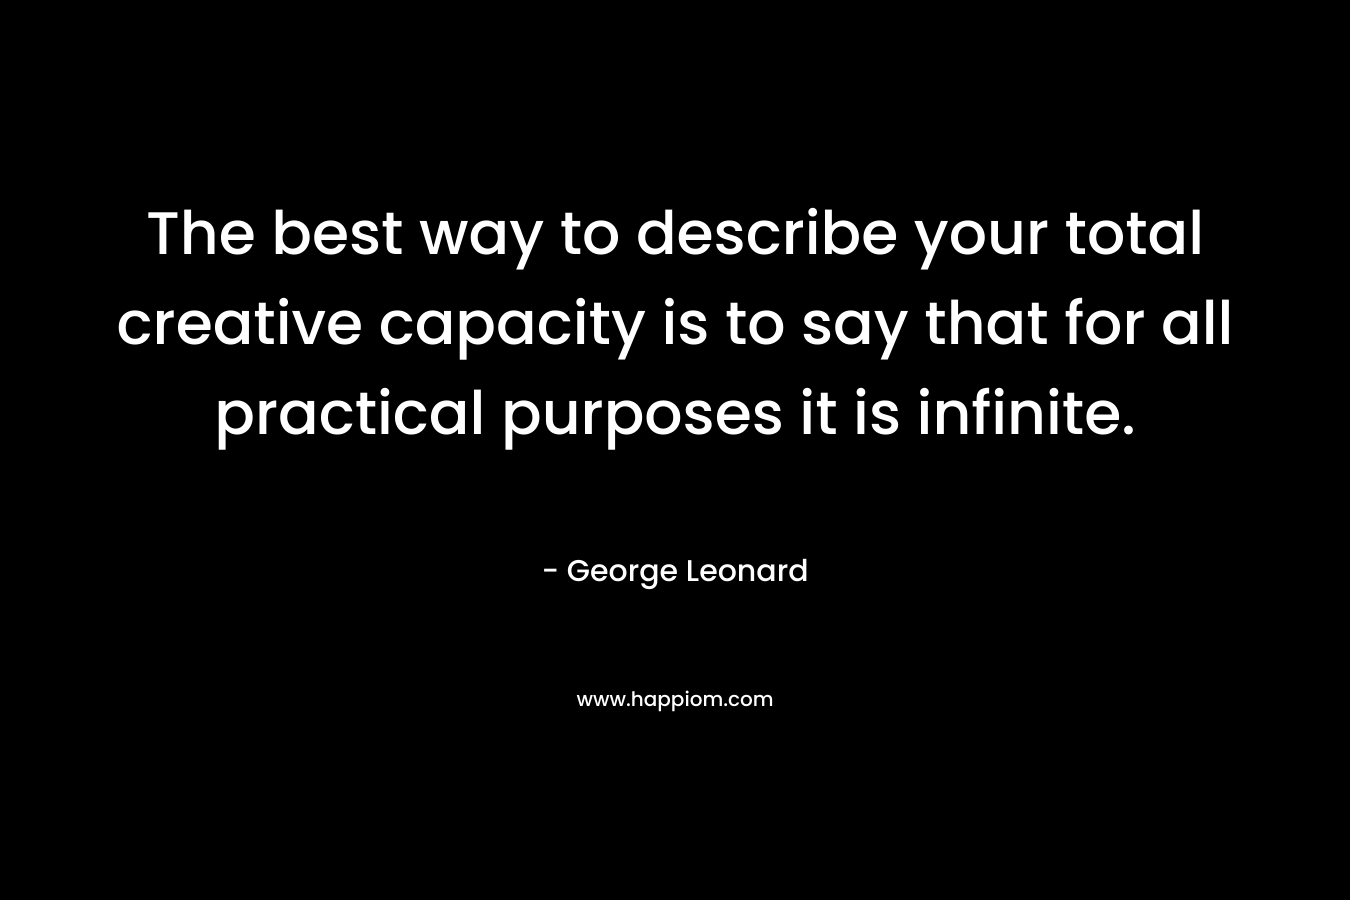 The best way to describe your total creative capacity is to say that for all practical purposes it is infinite.